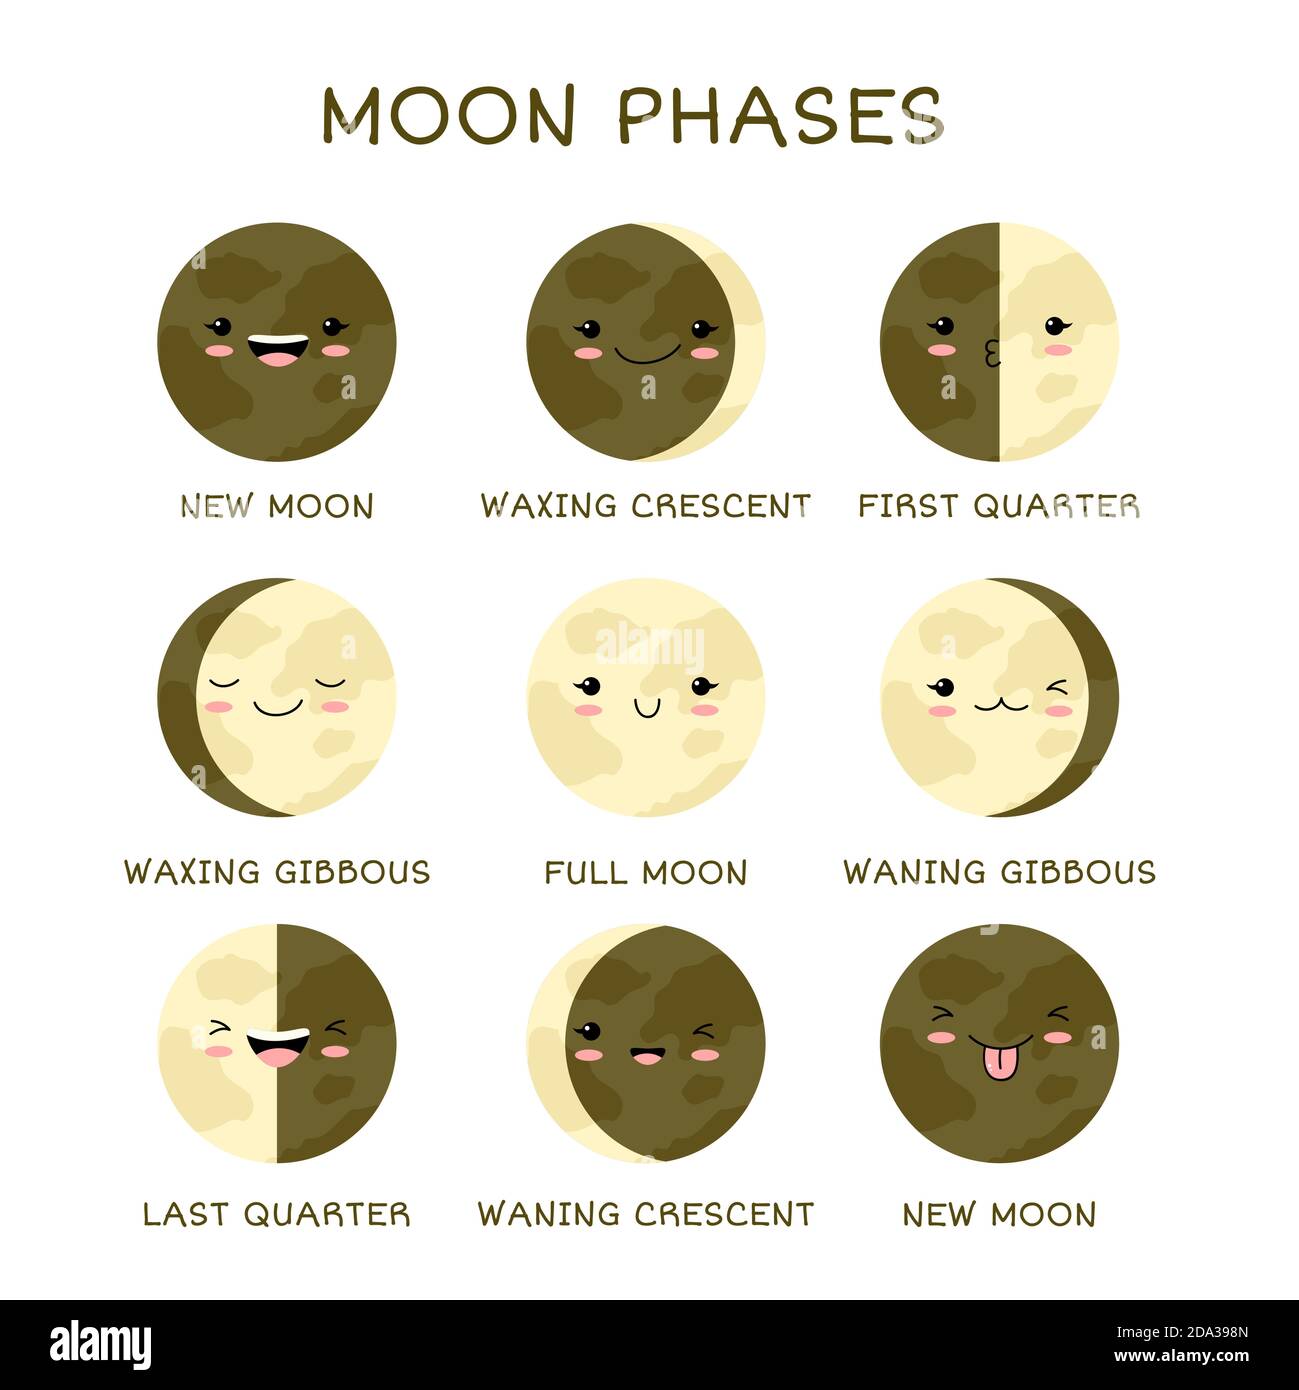 Learning moon phases. Moon Phase Print. Educational Posters with Lunar